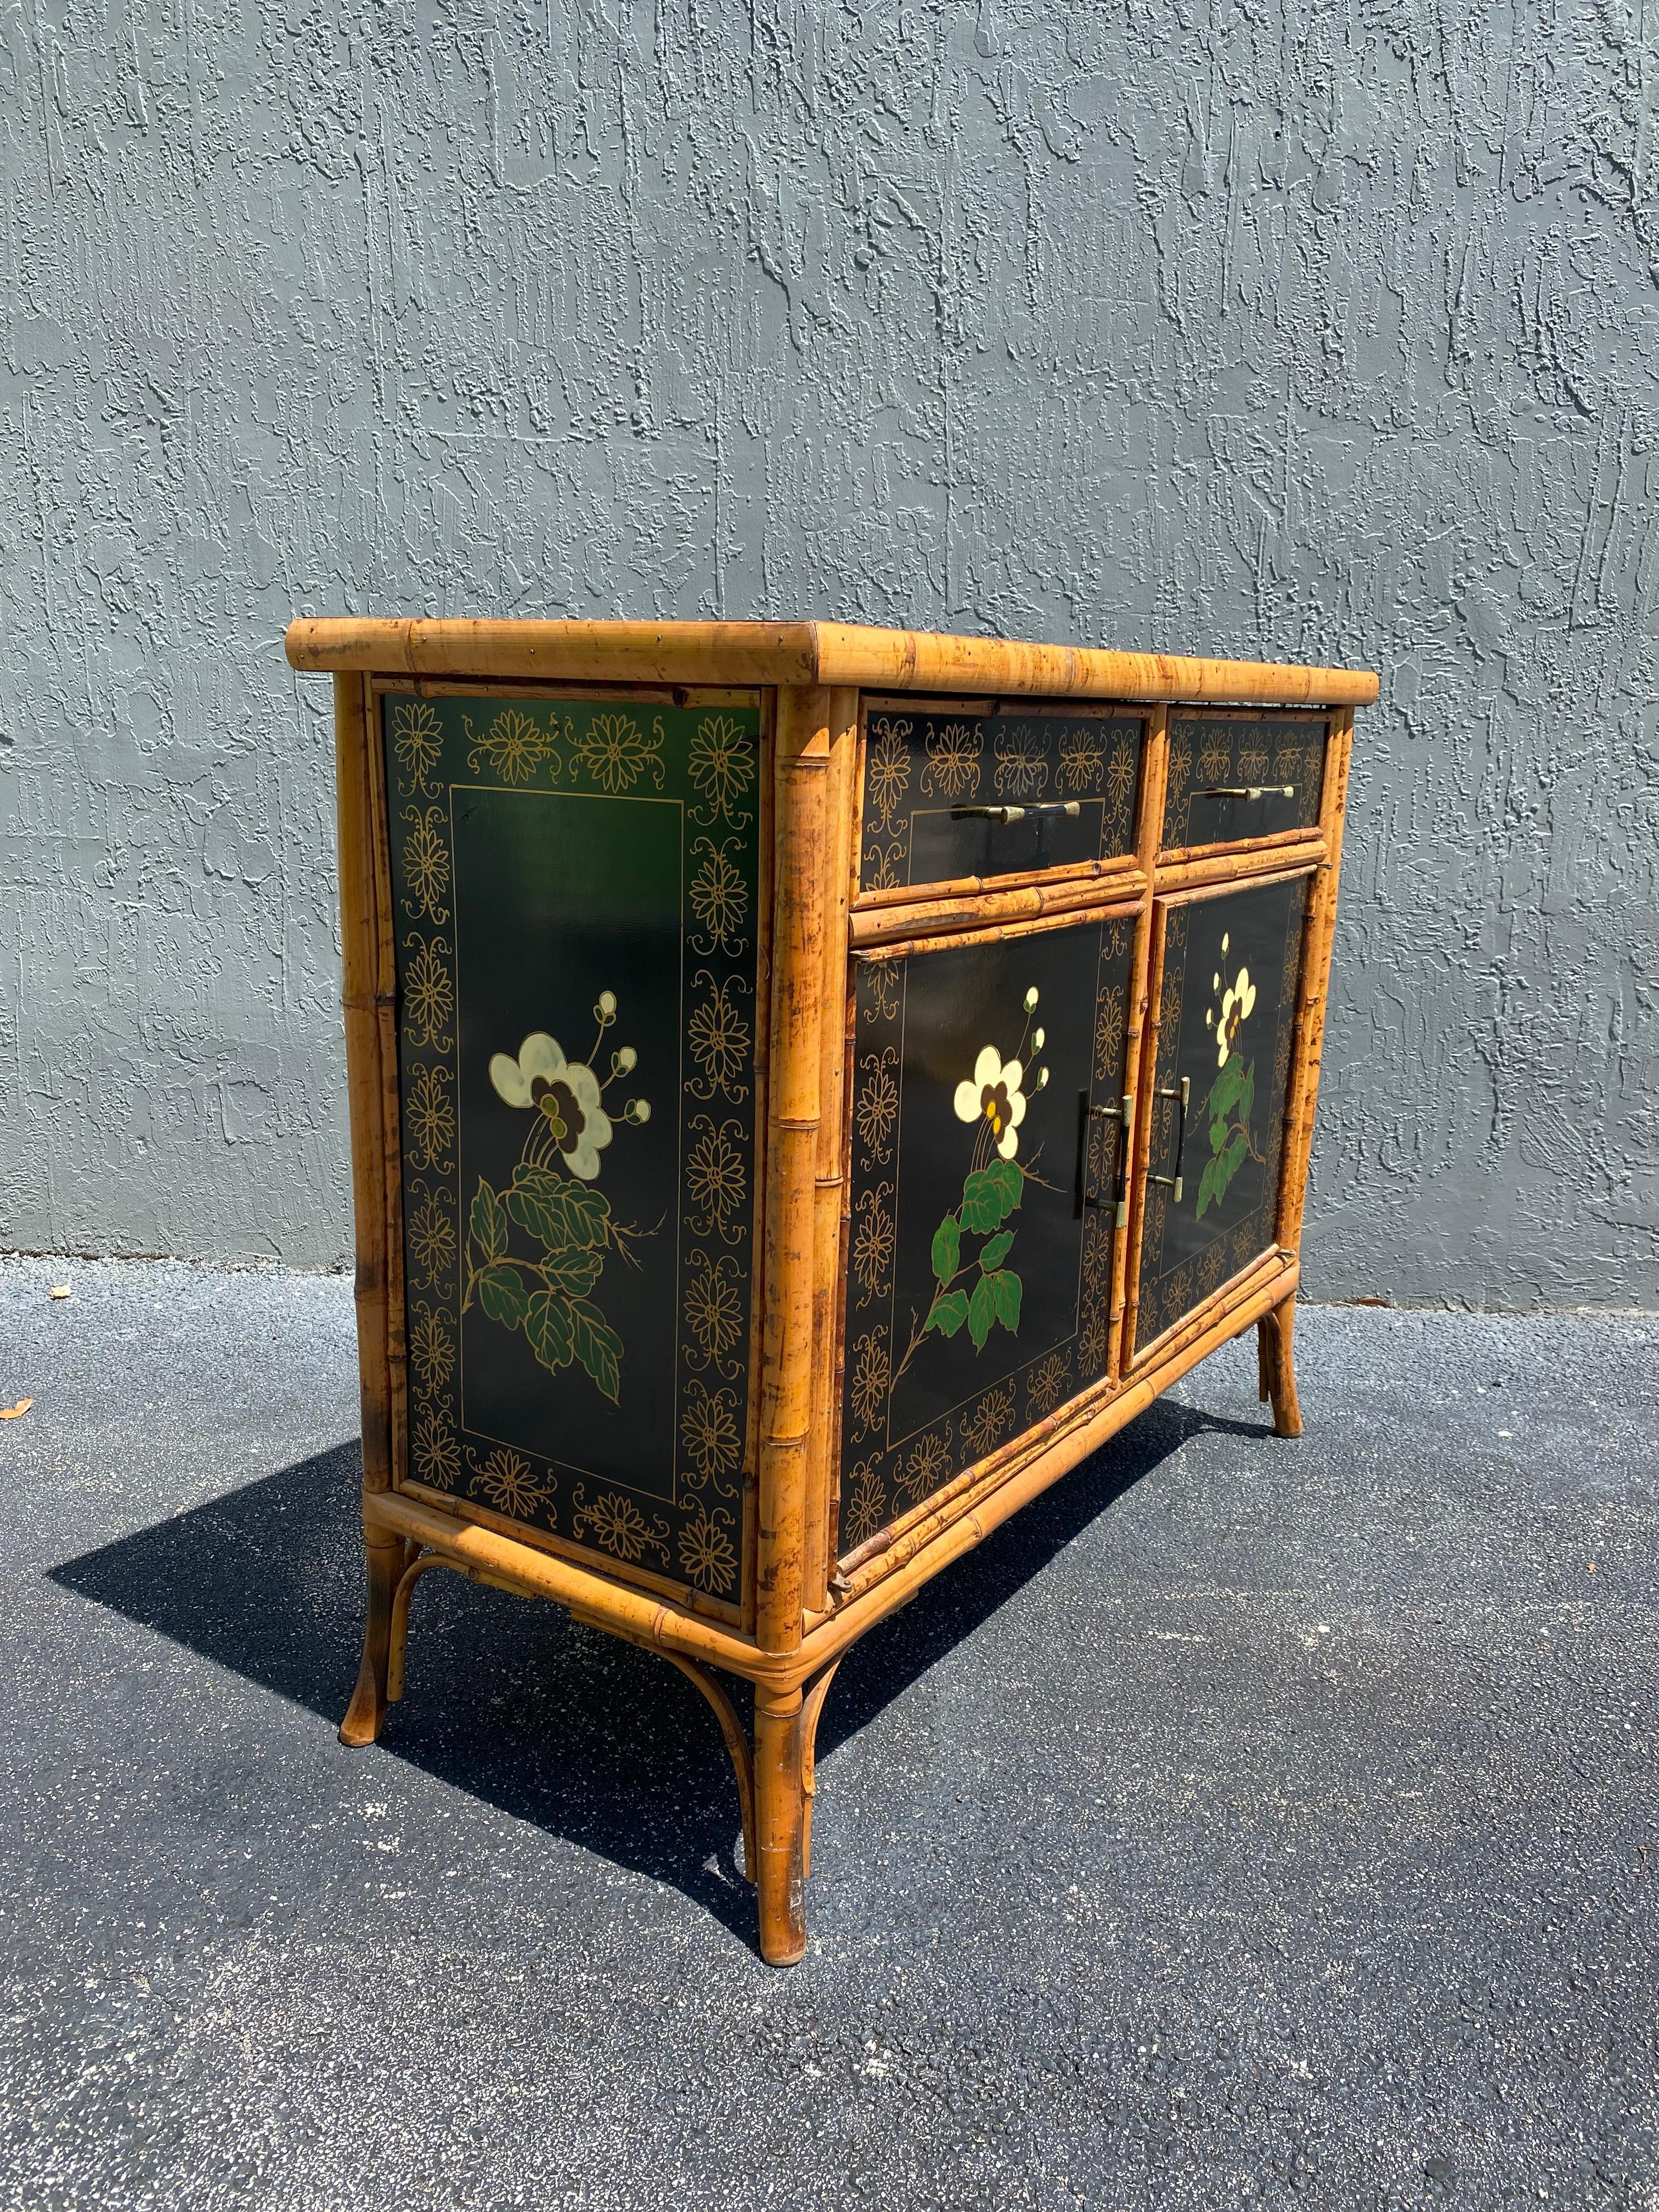 1920s Rattan Chinoiserie Hand Painted Cabinet Mini Sideboard In Good Condition For Sale In Fort Lauderdale, FL